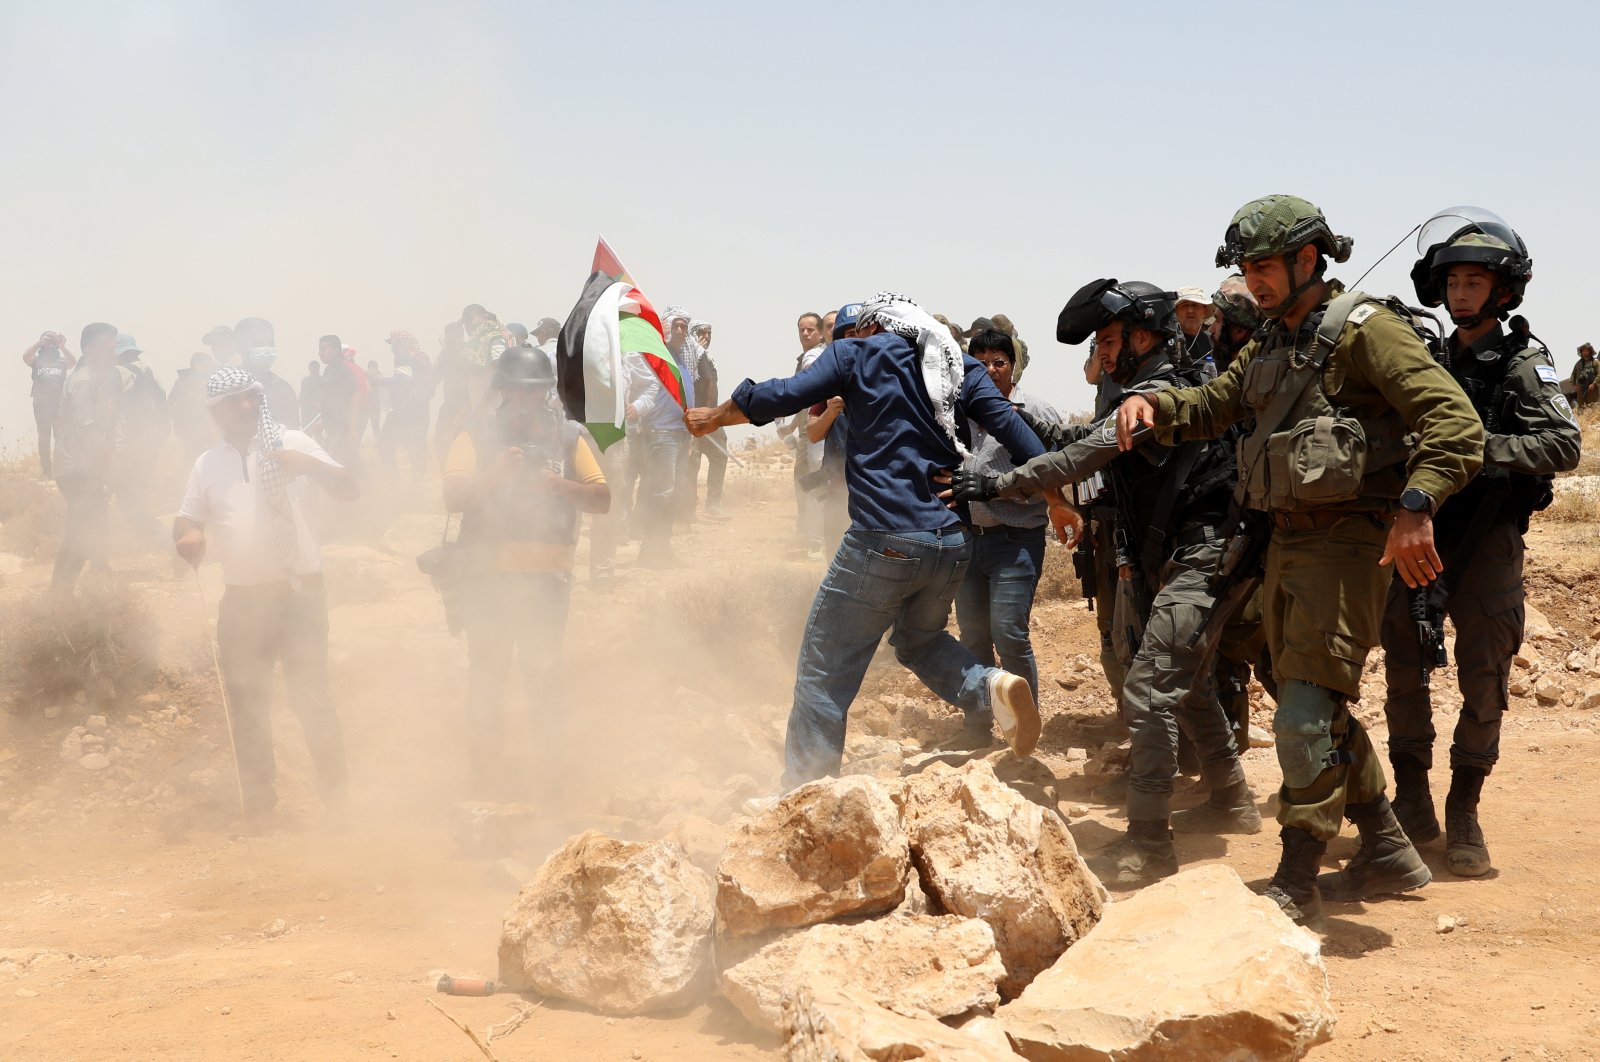 Palestinian protesters confront Israeli security forces during a rally against the eviction of more than 1,000 Palestinians in the West Bank village of Yatta, Palestine, June 17, 2022. (EPA Photo)